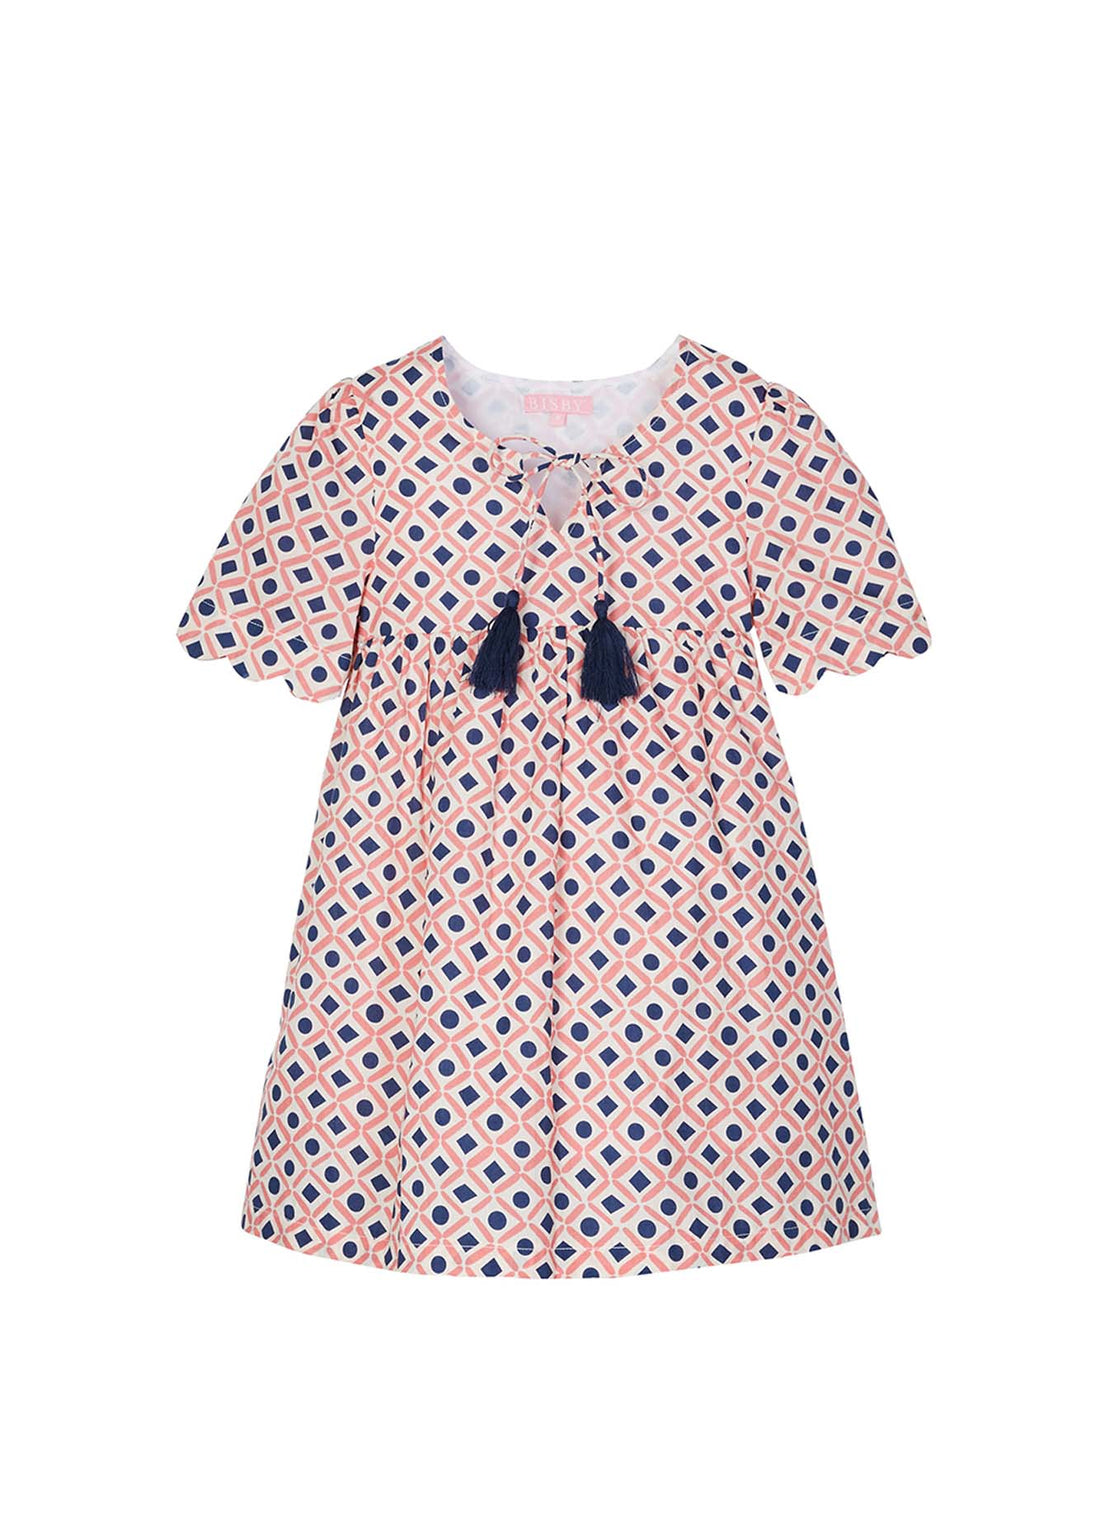 tween girls pink and navy geo print dress with scalloped sleeves and navy tassels